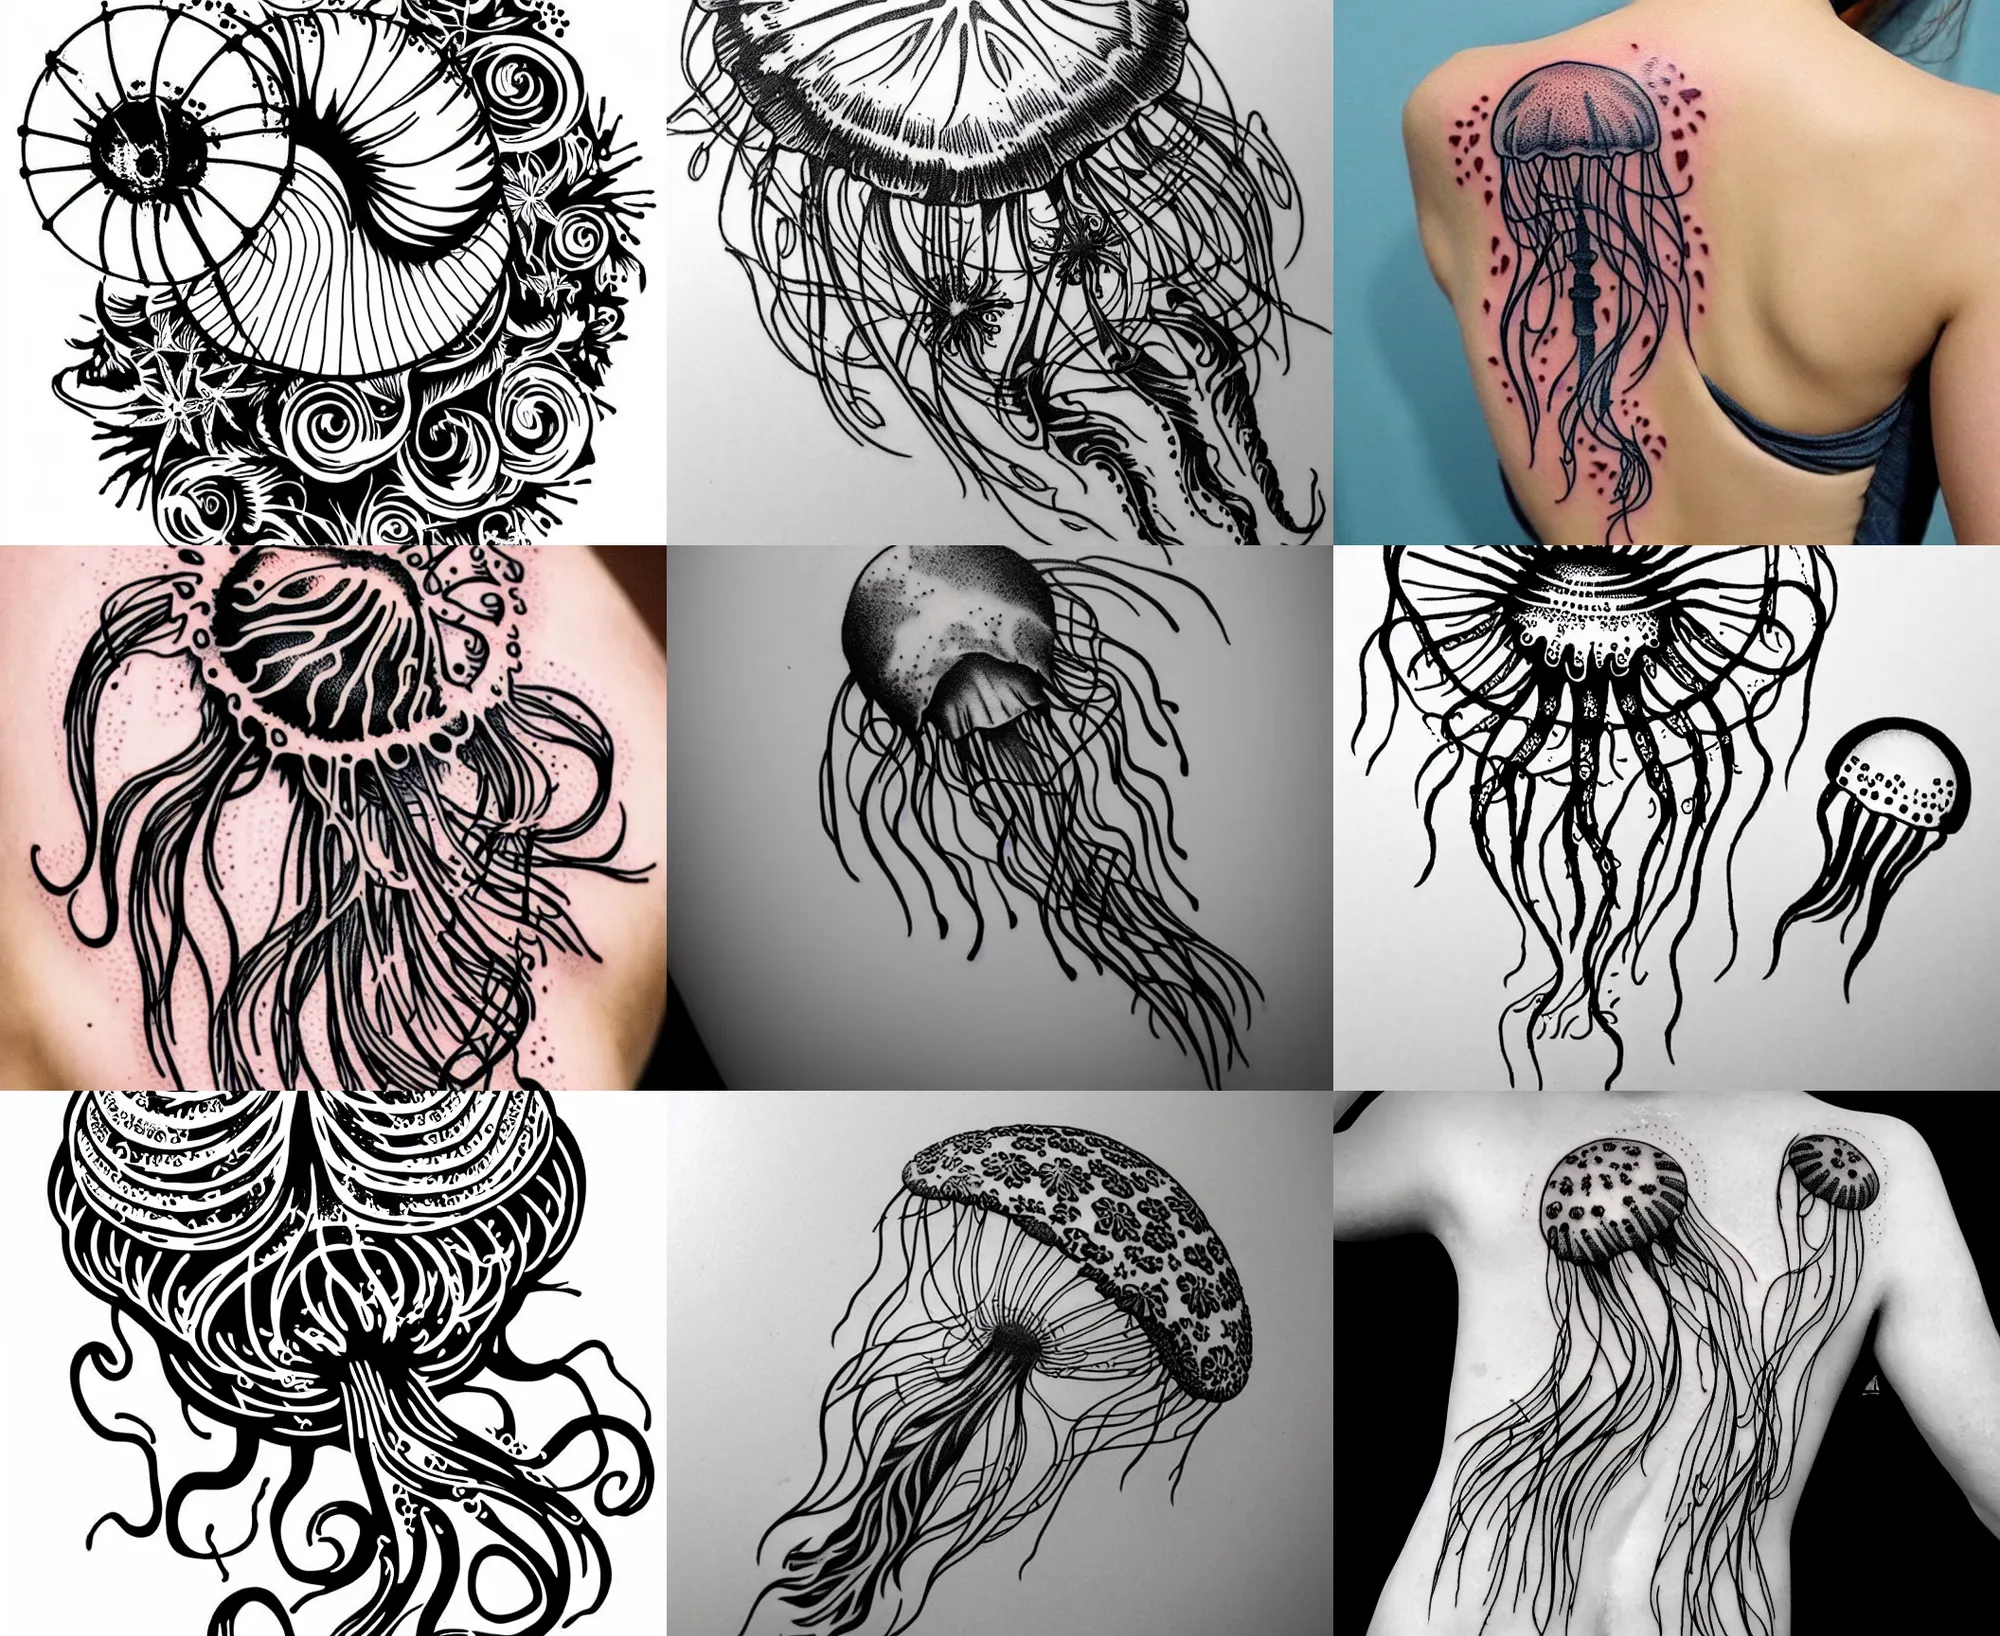 Jellyfish Tattoo Canvas Prints for Sale  Redbubble